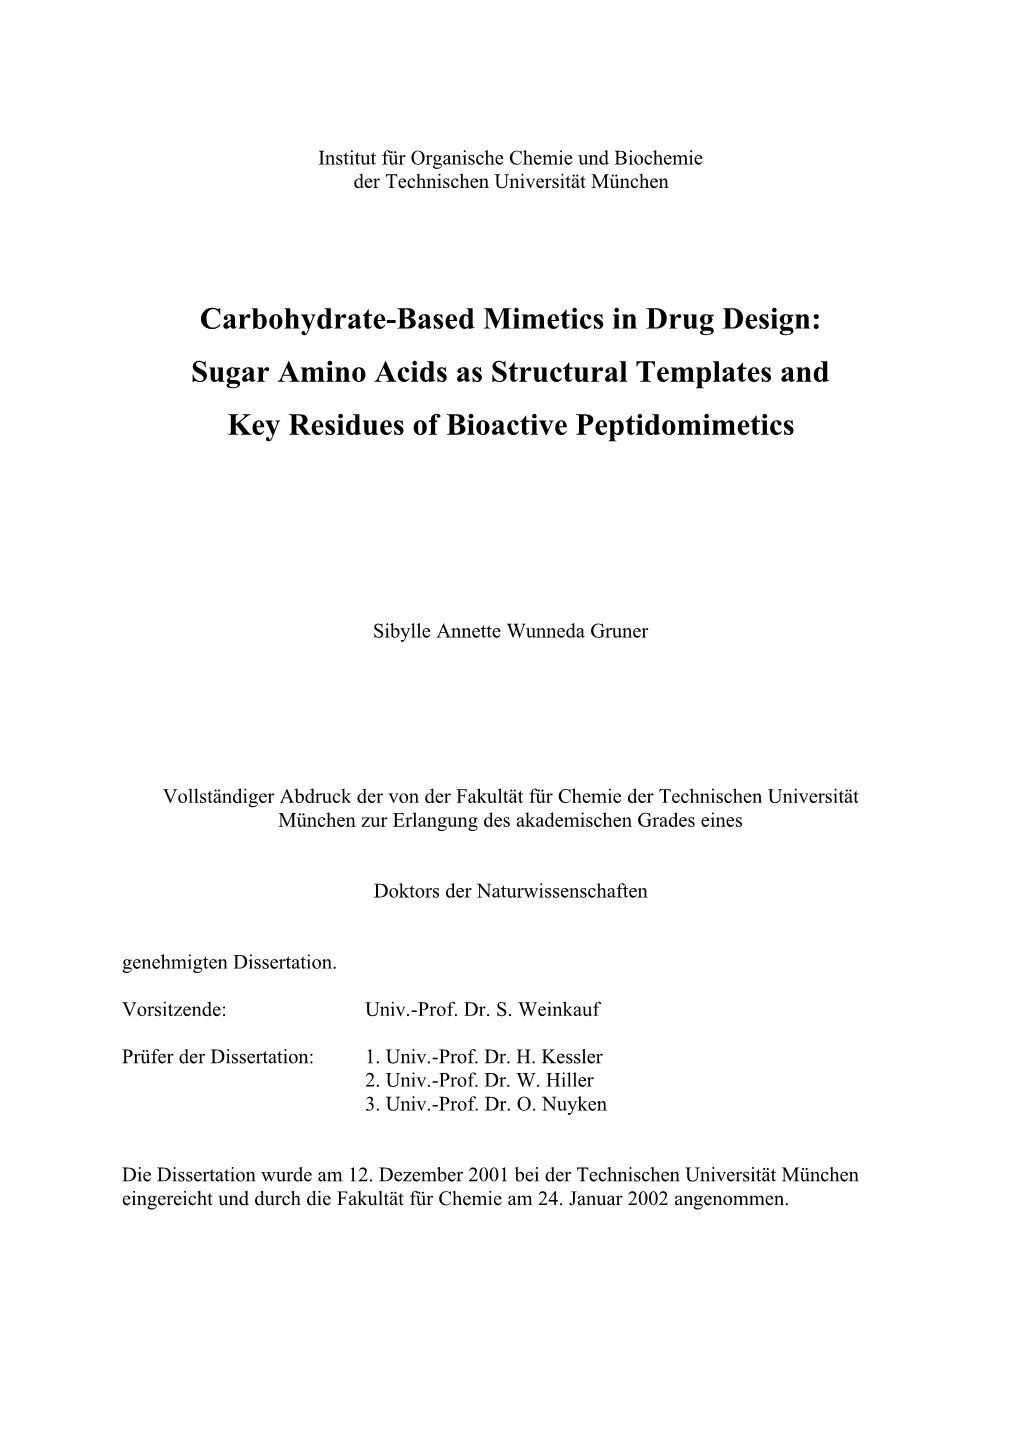 Carbohydrate-Based Mimetics in Drug Design: Sugar Amino Acids As Structural Templates and Key Residues of Bioactive Peptidomimetics